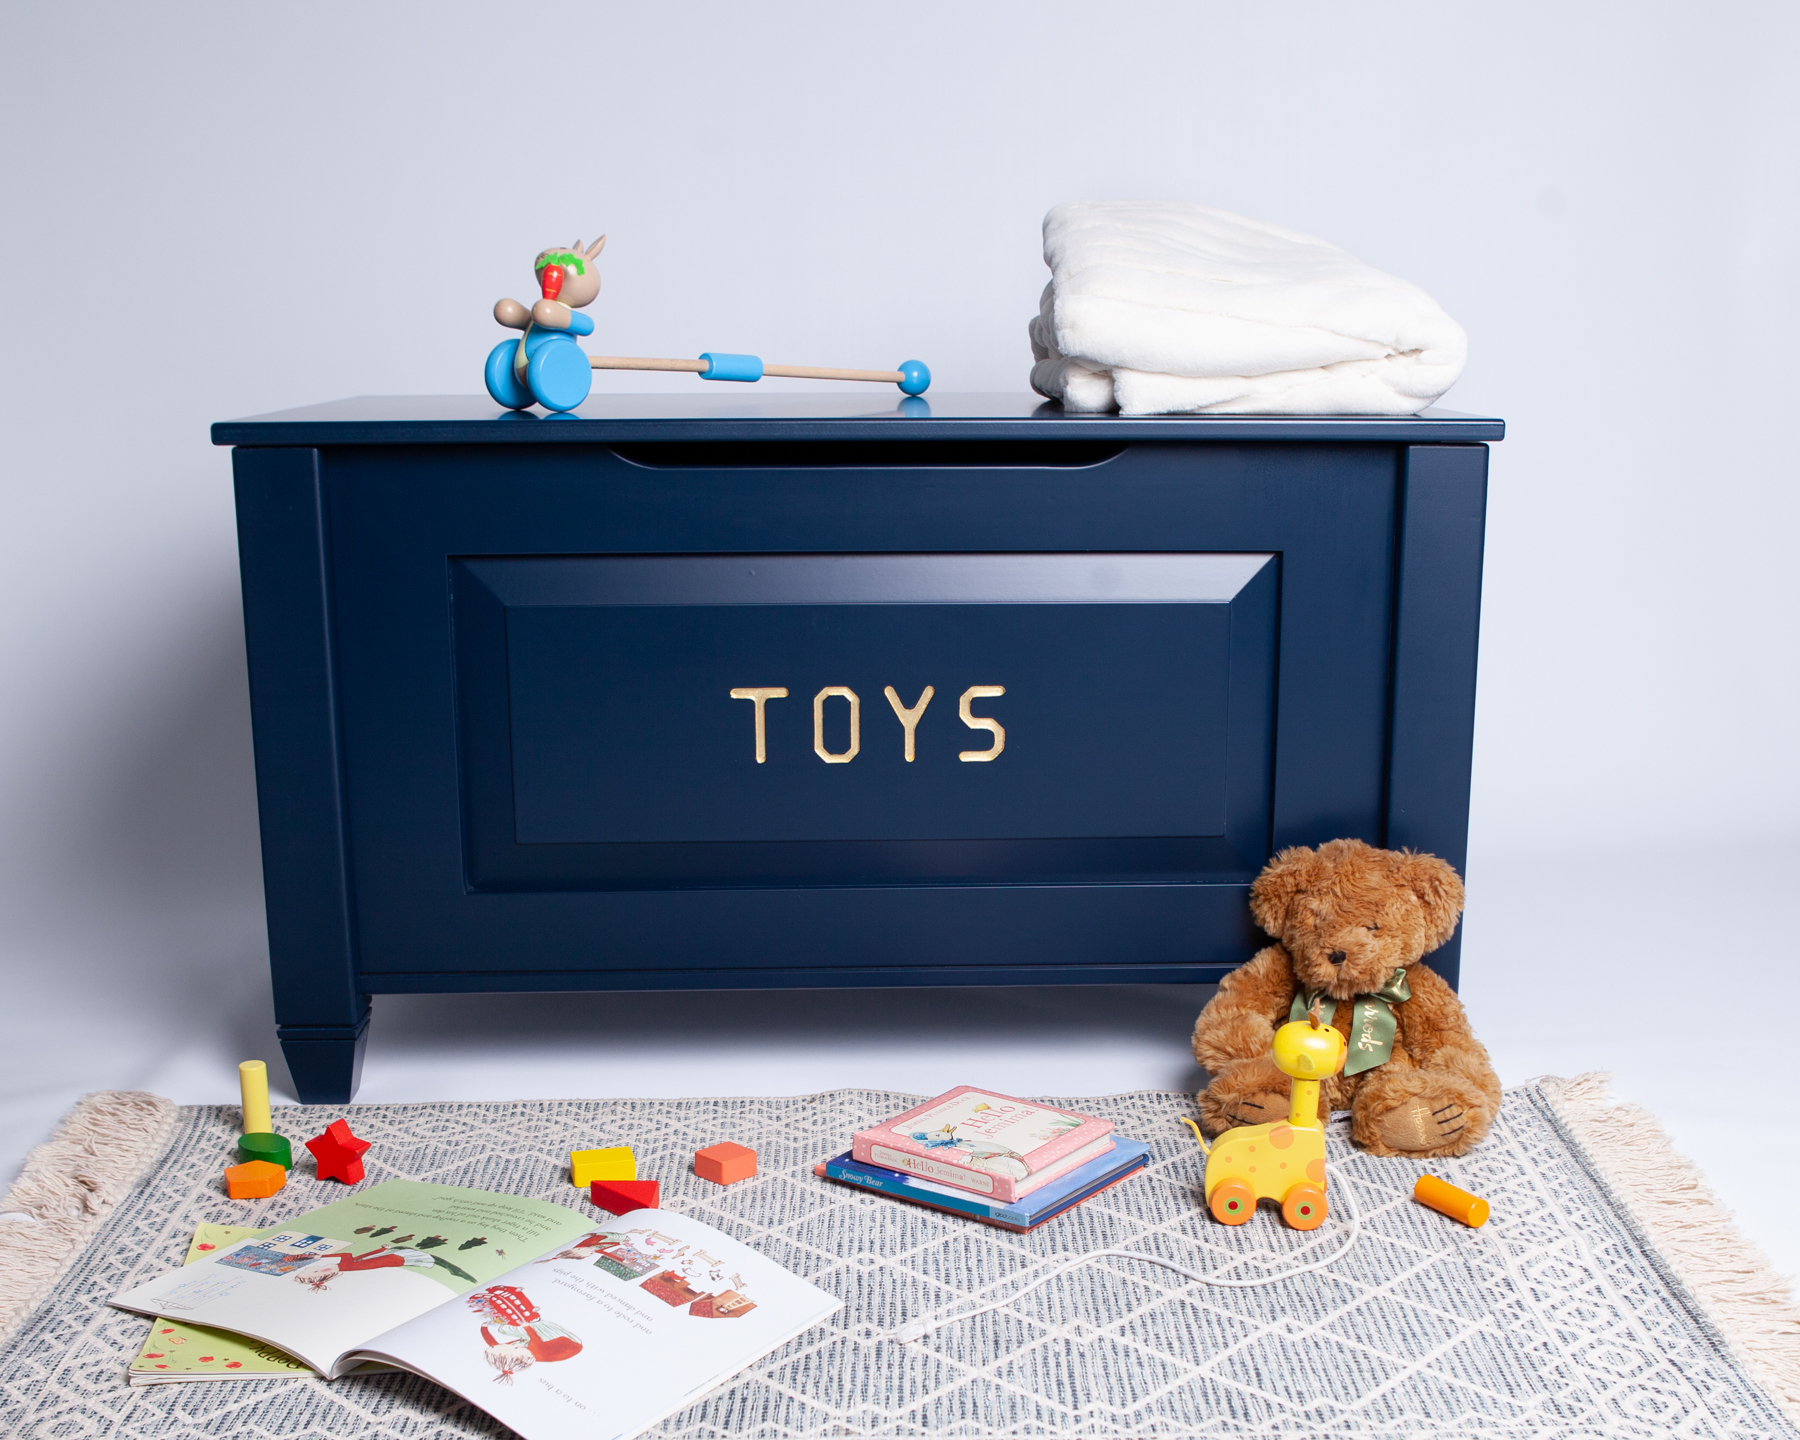 High-end product - BabyChum is supplying Harrods’ first luxury toy box, costing £2,199